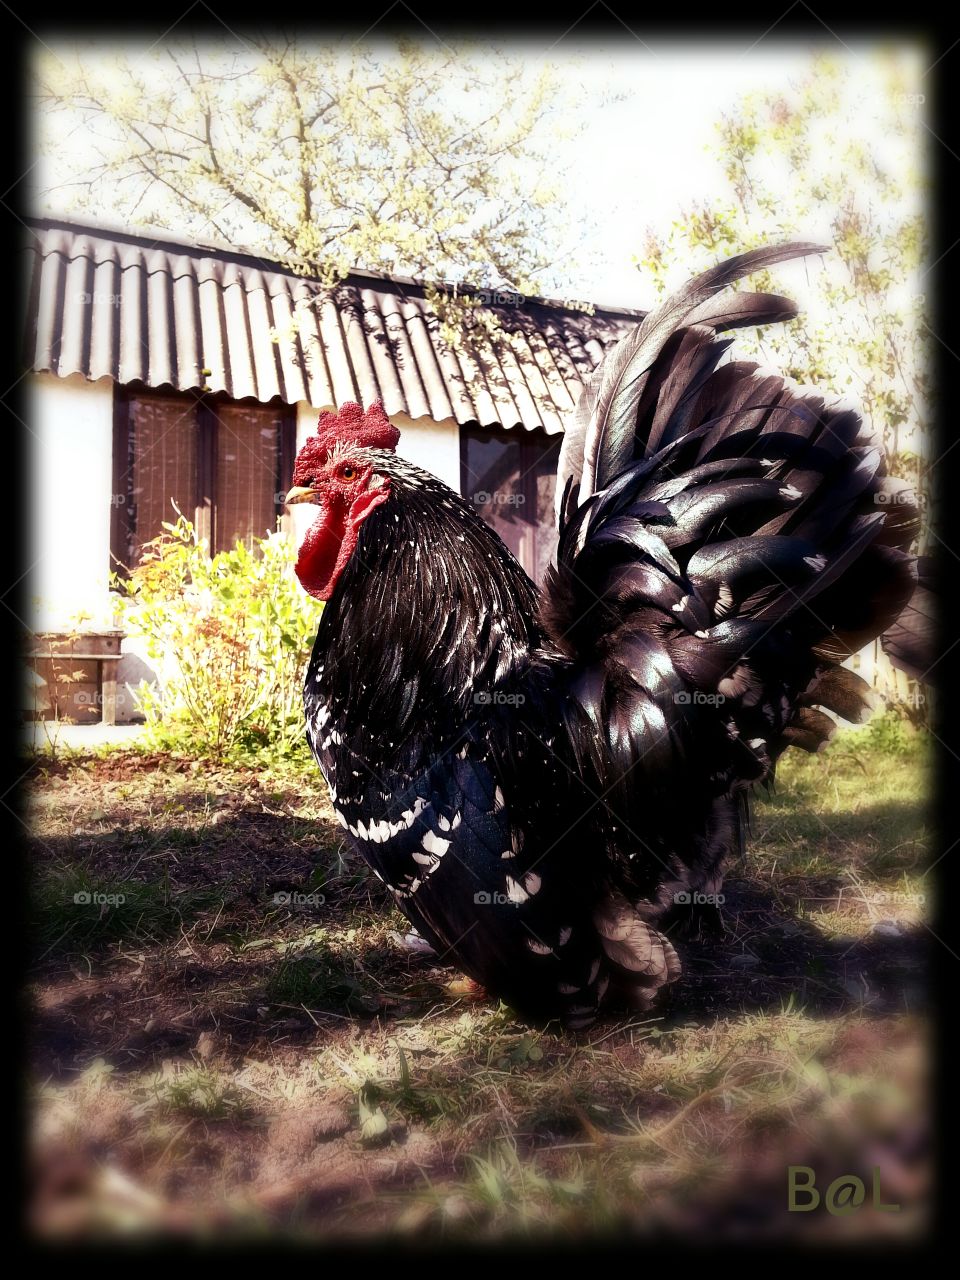 Harley D.. my own hatched chabo rooster 